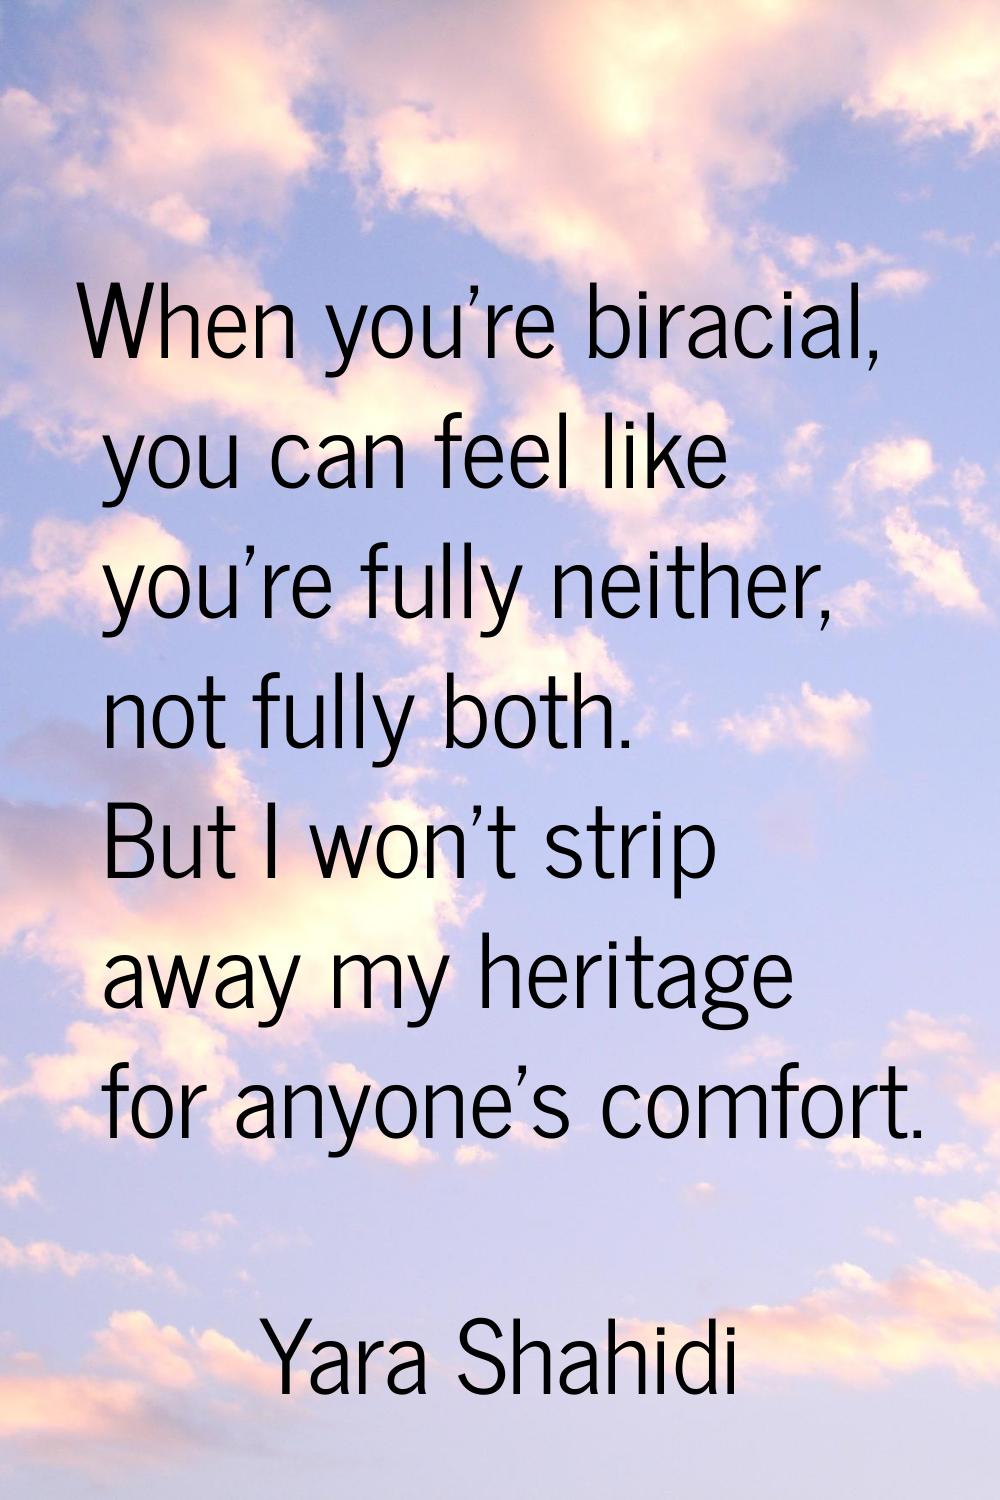 When you're biracial, you can feel like you're fully neither, not fully both. But I won't strip awa